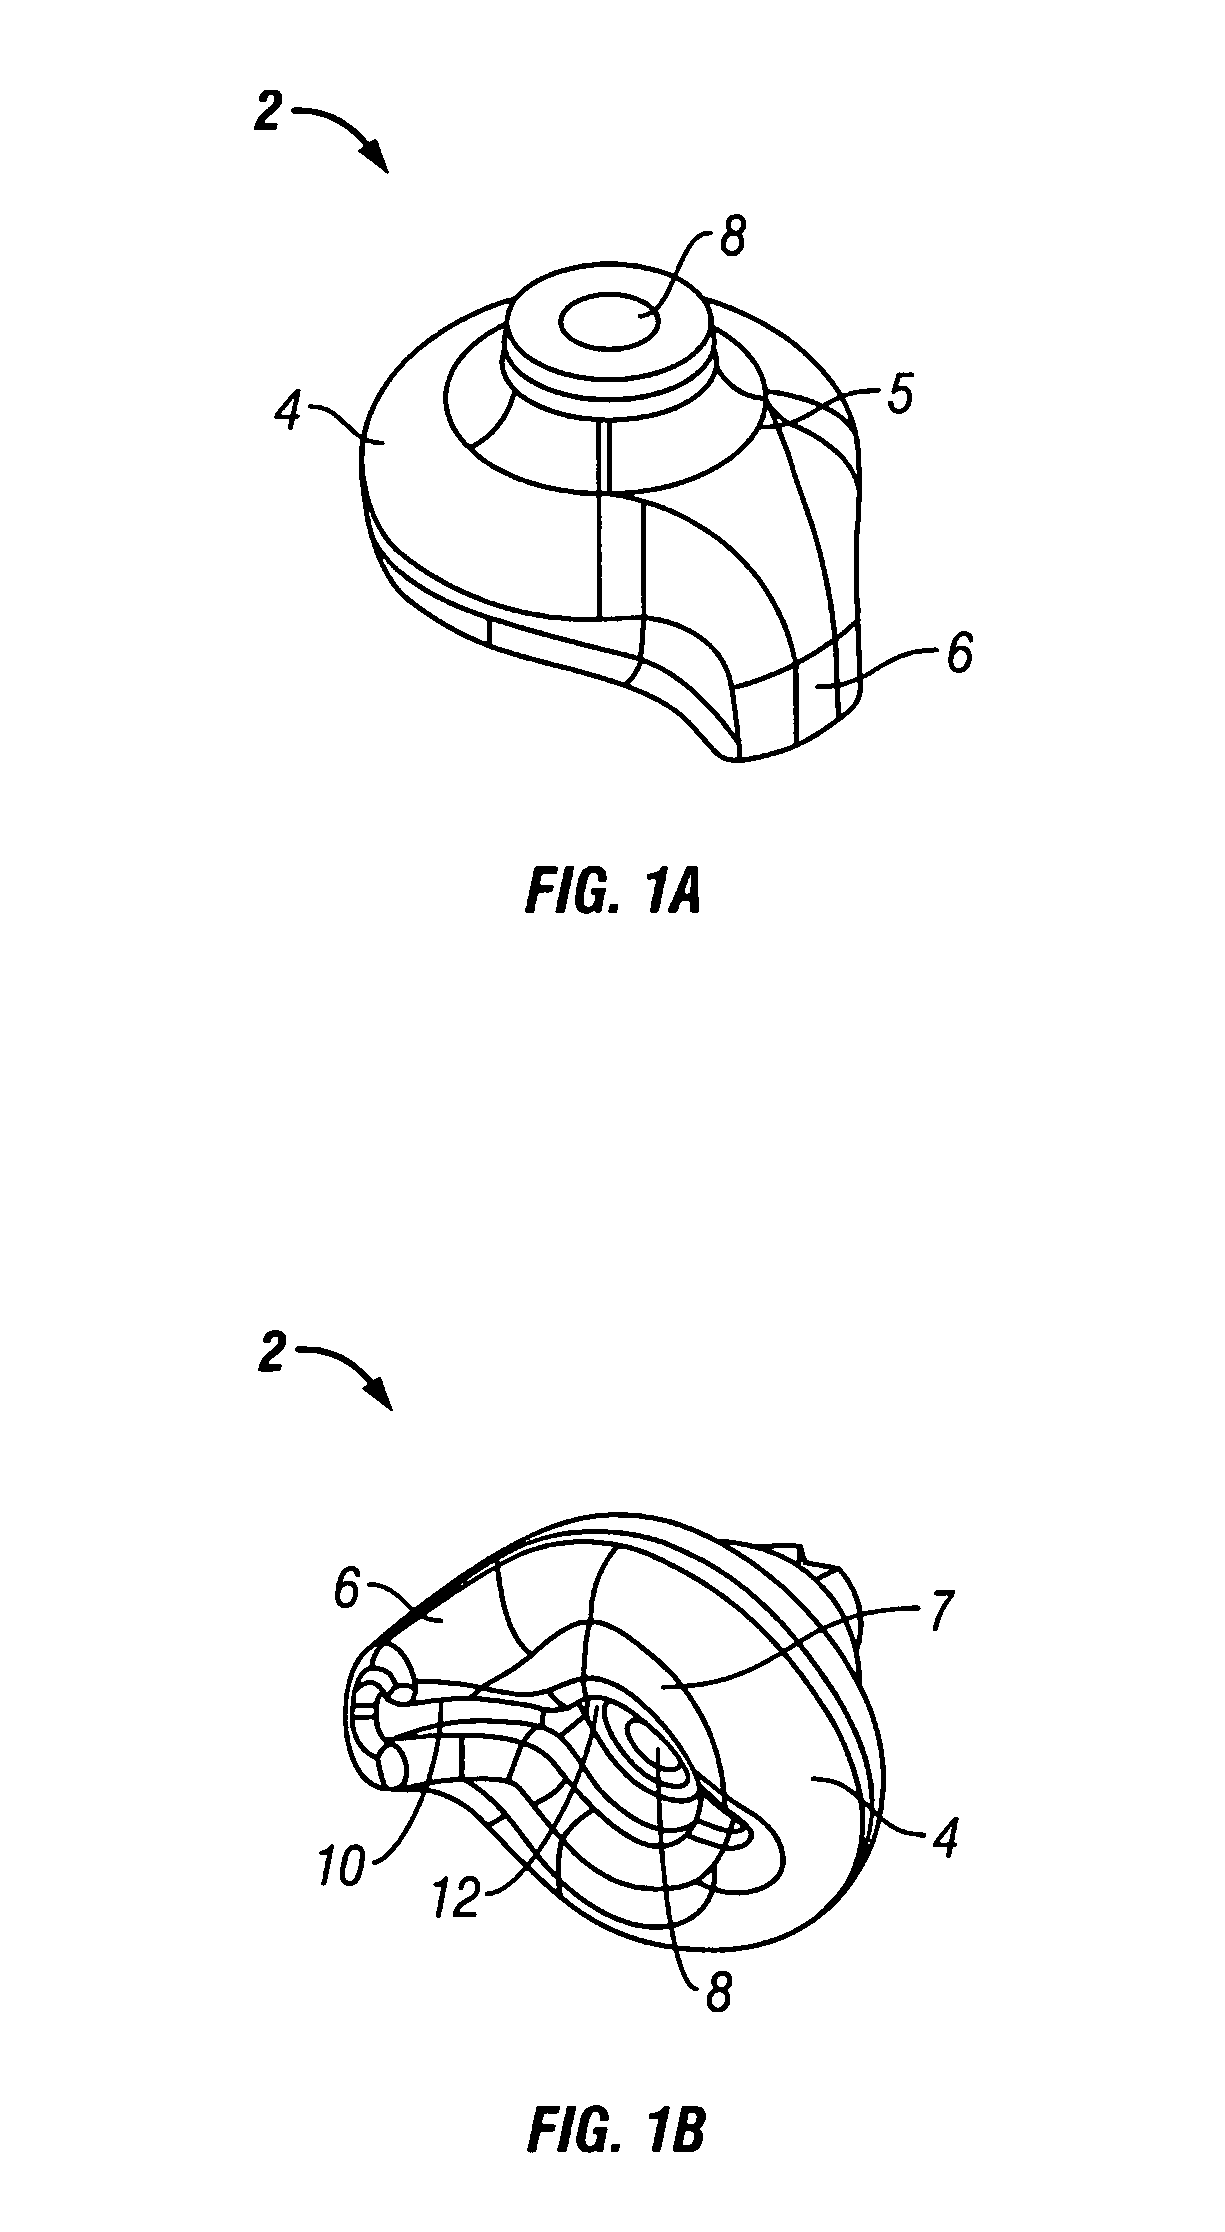 Conformable ear tip with spout